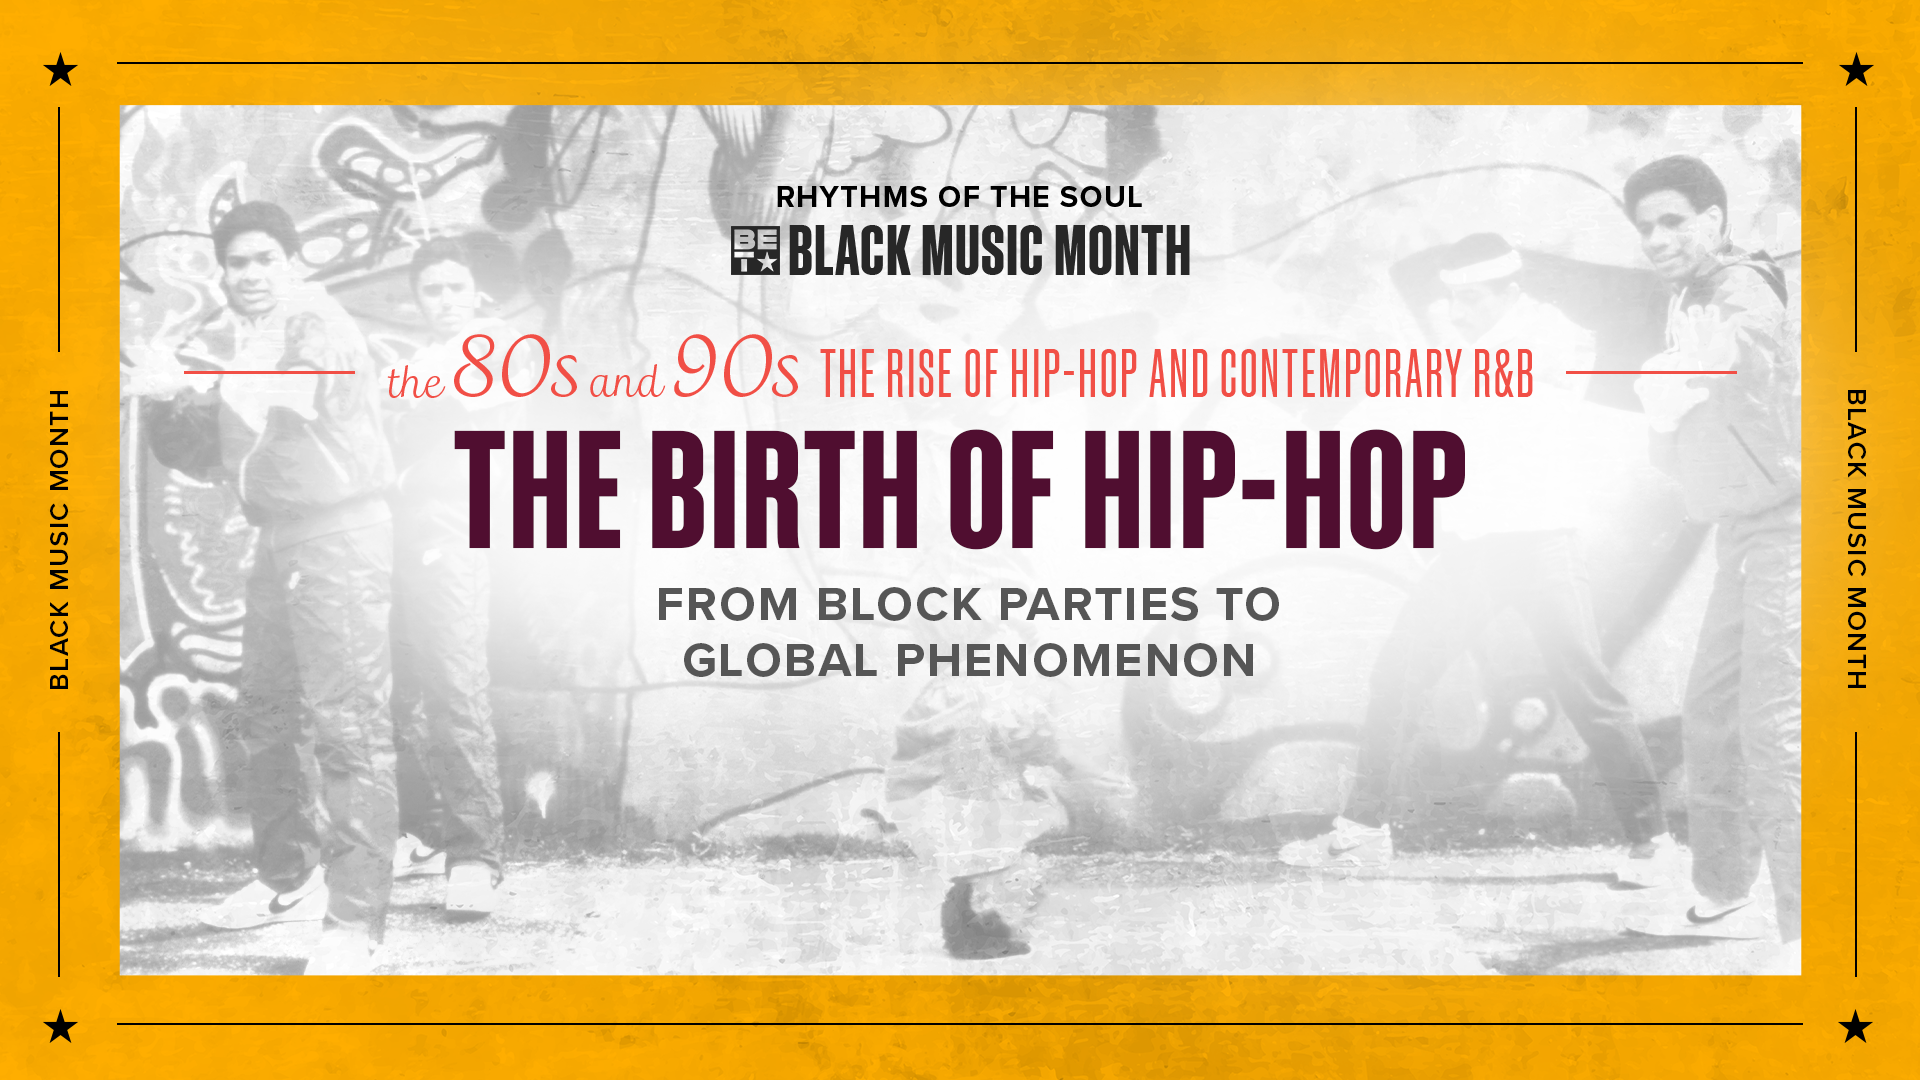 The Birth of Hip-Hop: From Block Parties to Global Phenomenon